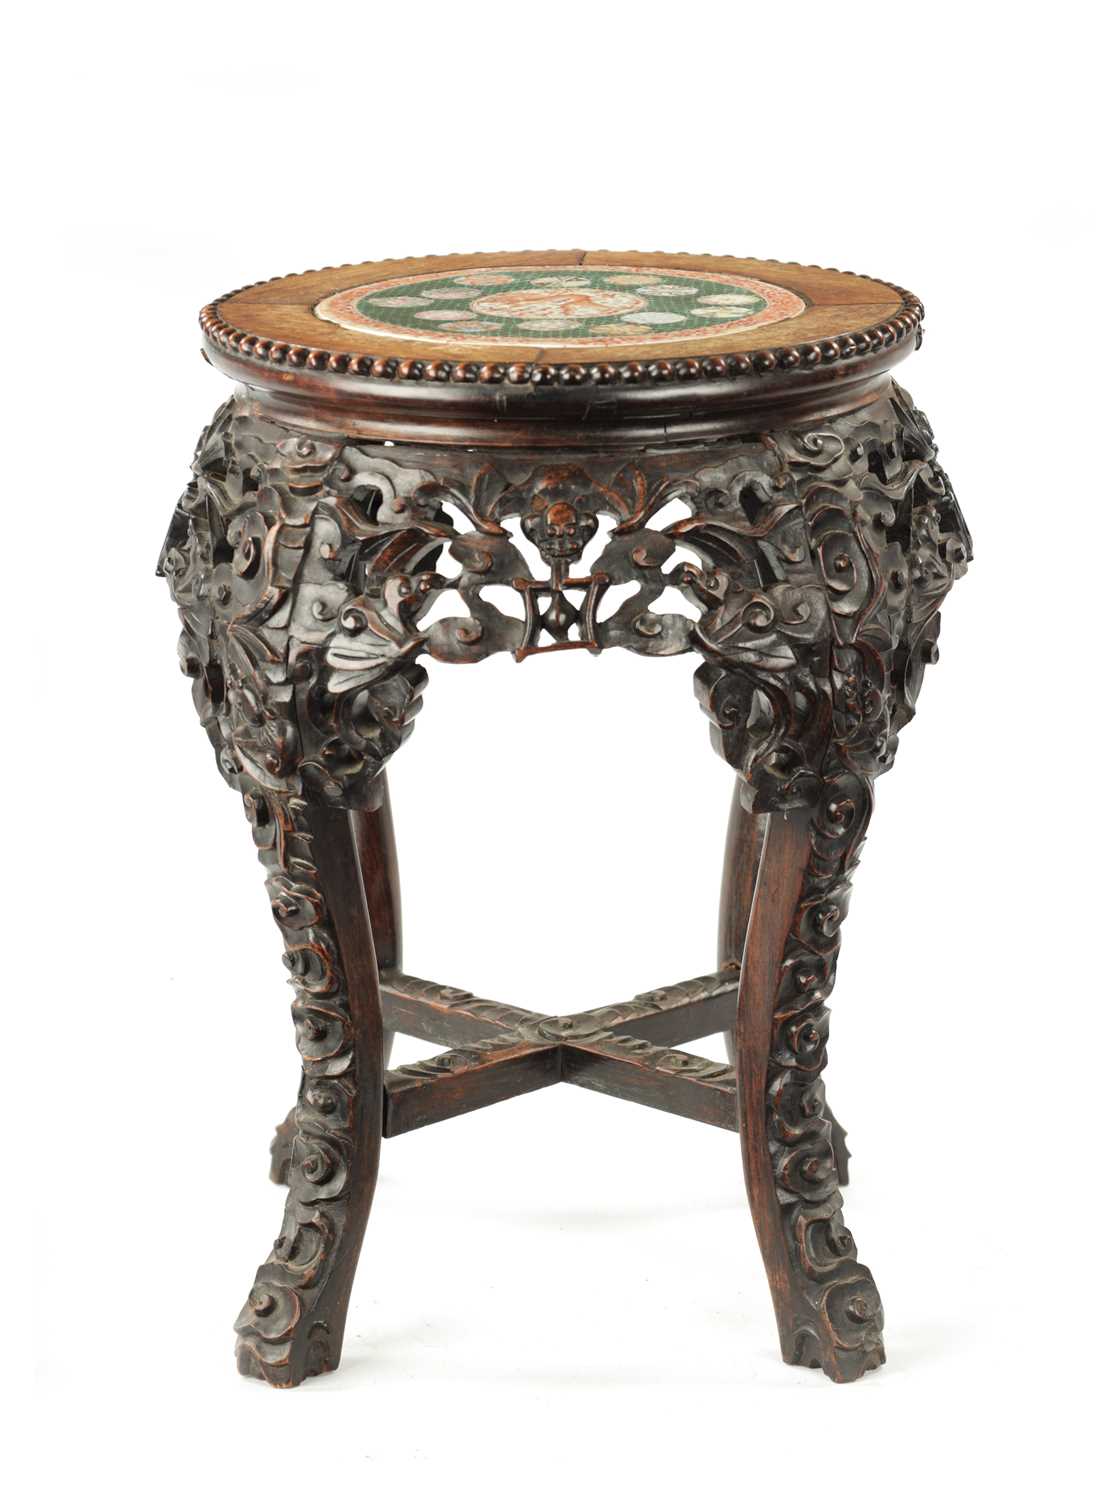 Lot 591 - A 19TH CENTURY CHINESE HARDWOOD JARDINIERE STAND WITH CANTON PORCELAIN TOP